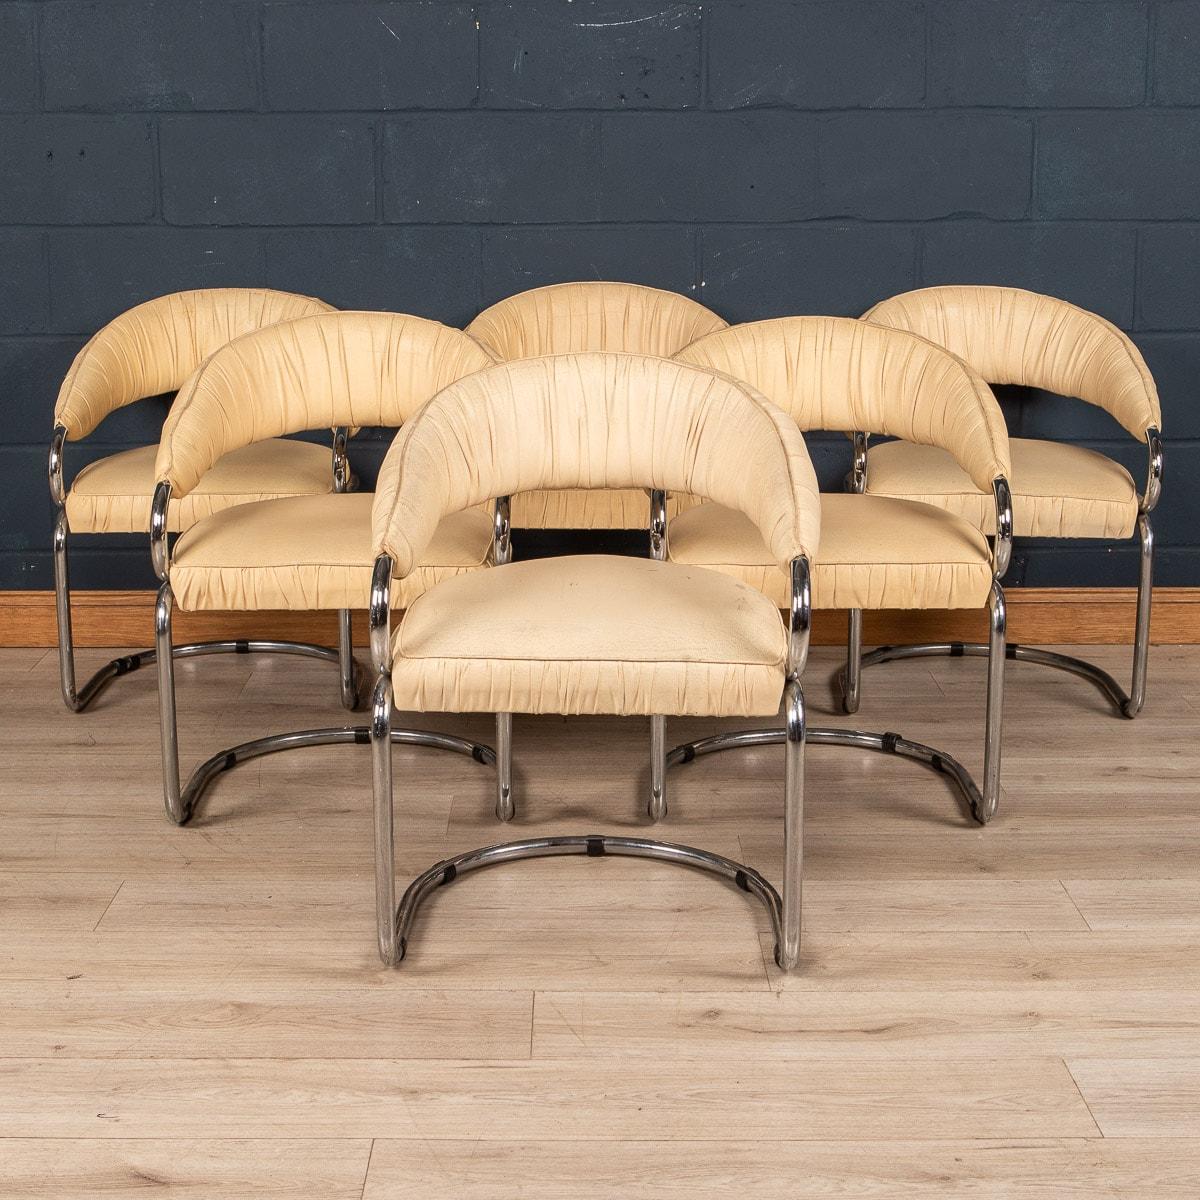 A striking set of six dining chairs designed by Giotto Stoppino for Kartell, made in Italy in the 1970s. The chairs have tubular chrome-plated metal frame, finished with a cream leather upholstery.

CONDITION
In Good Condition - Some minor